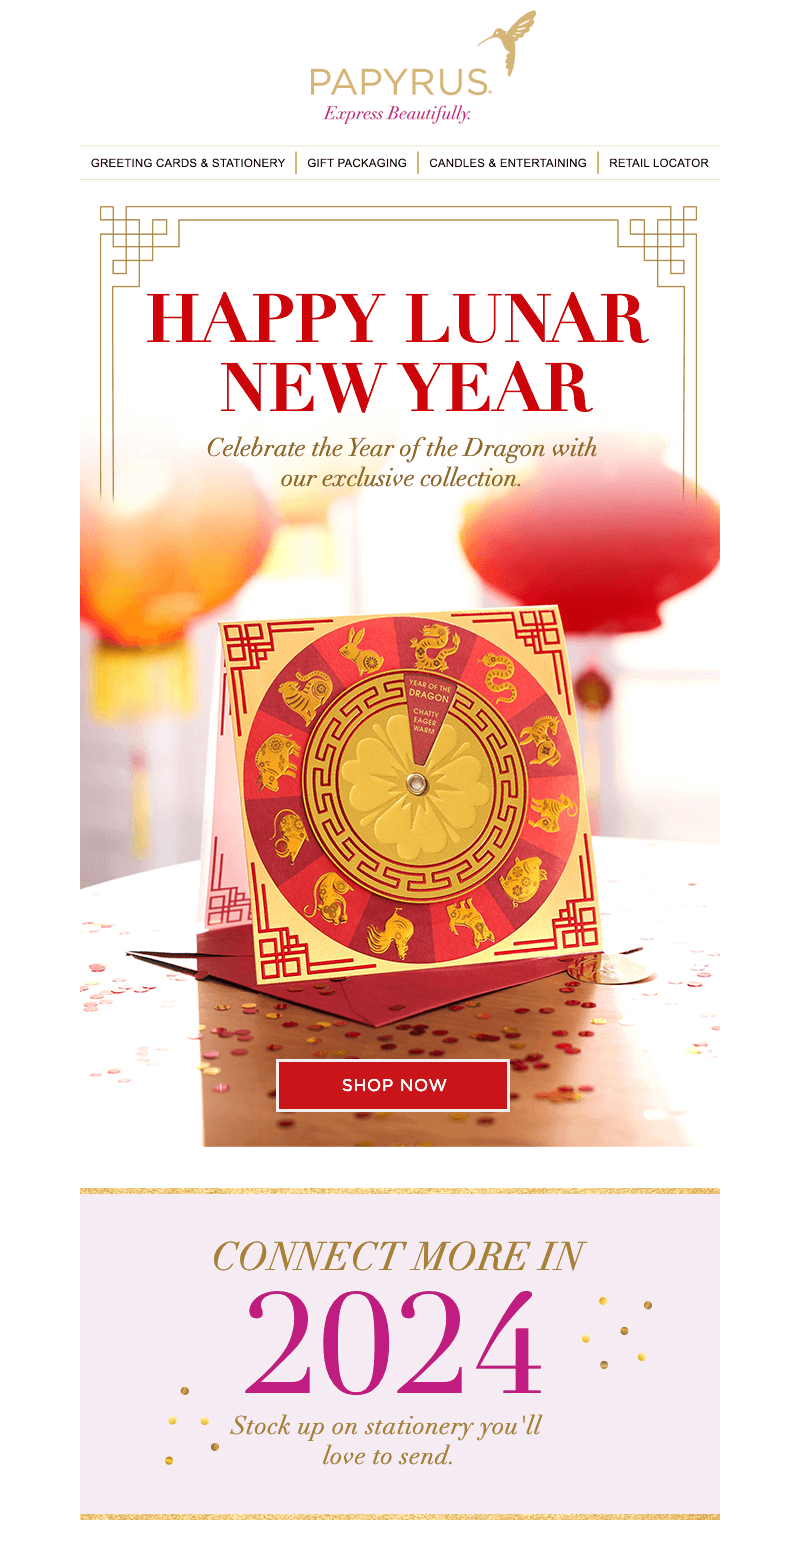 A Lunar New Year email from the stationary brand Papyrus featuring the zodiac calendar and the red and gold colors in the hero image